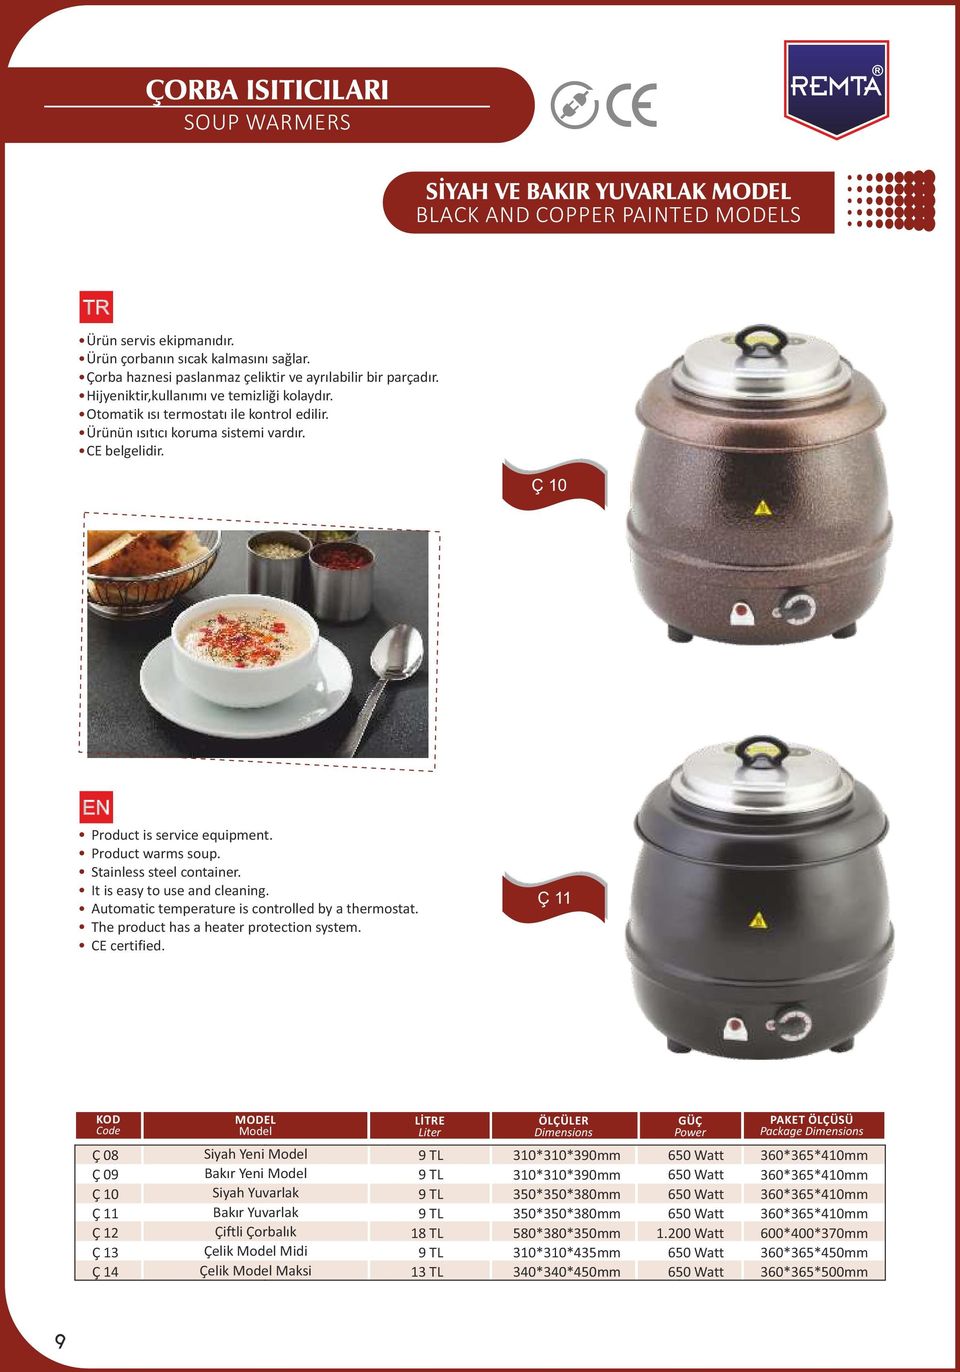 Ç 10 Product is service equipment. Product warms soup. Stainless steel container. It is easy to use and cleaning. Automatic temperature is controlled by a thermostat.